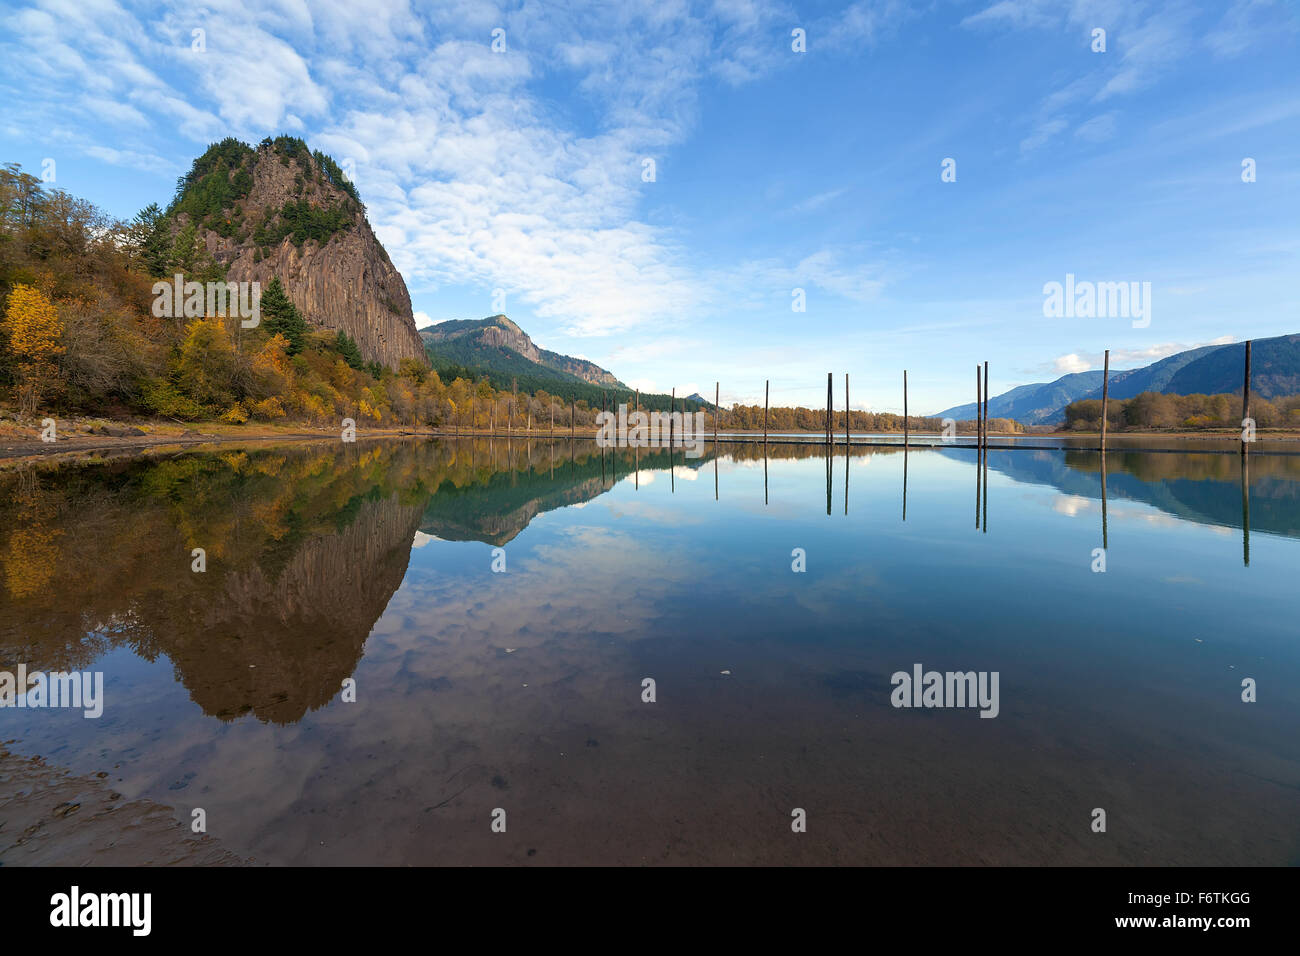 Beacon Rock State Park in Washington State Reflected in the Water of Columbia River Gorge in Fall Season Stock Photo